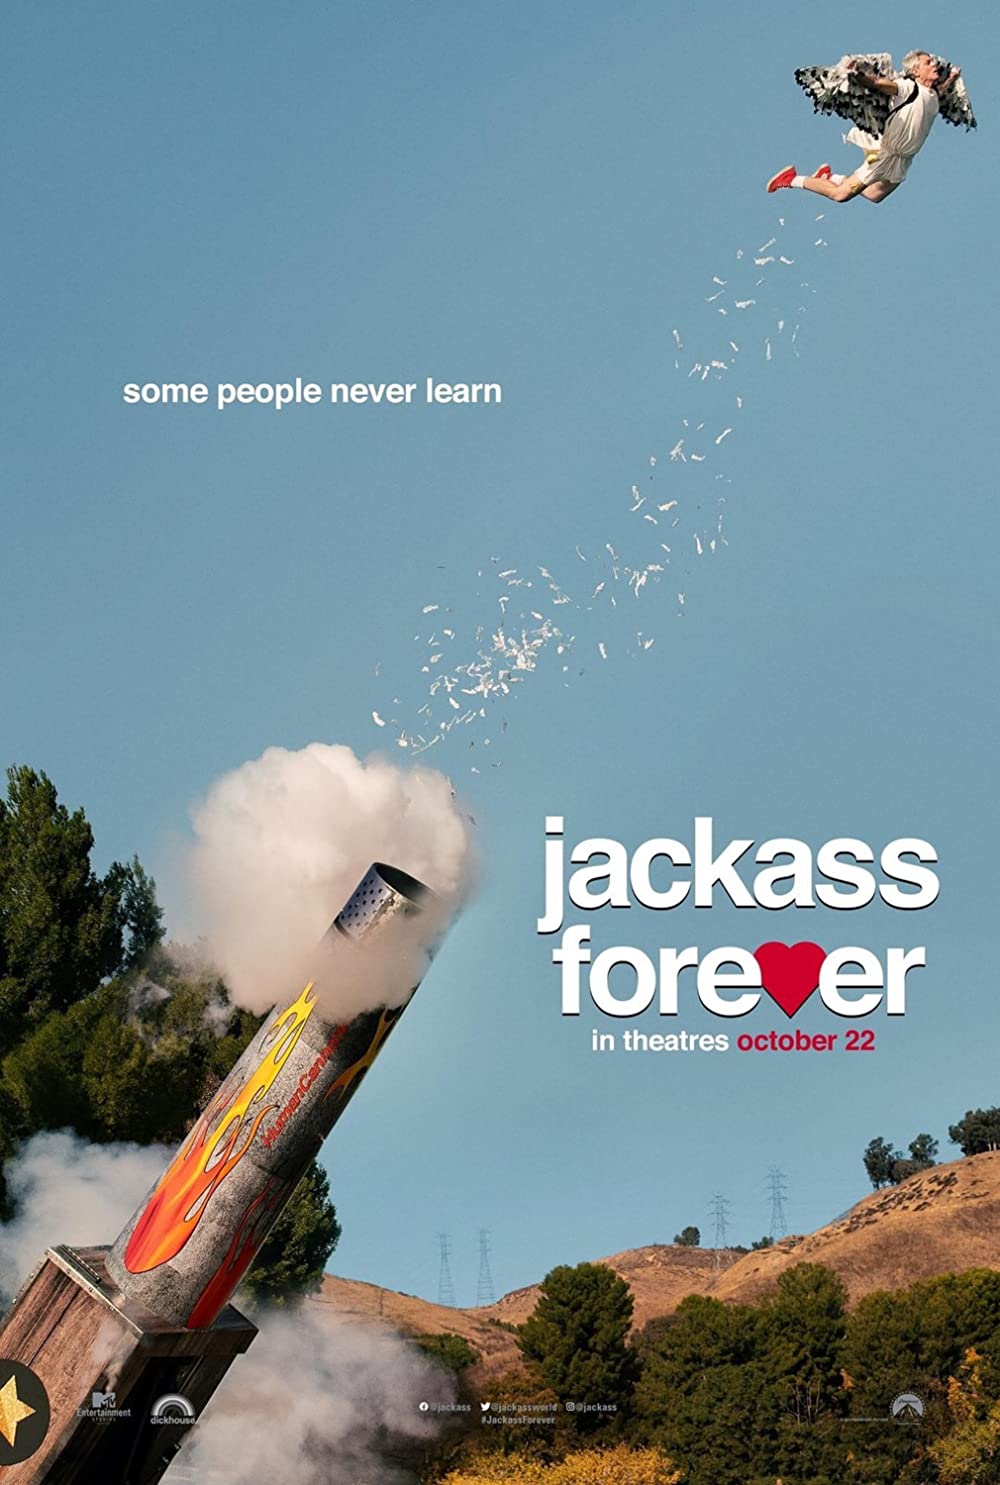 Jackass Forever Blue-ray to Include 40 Minutes of Unseen Footage?